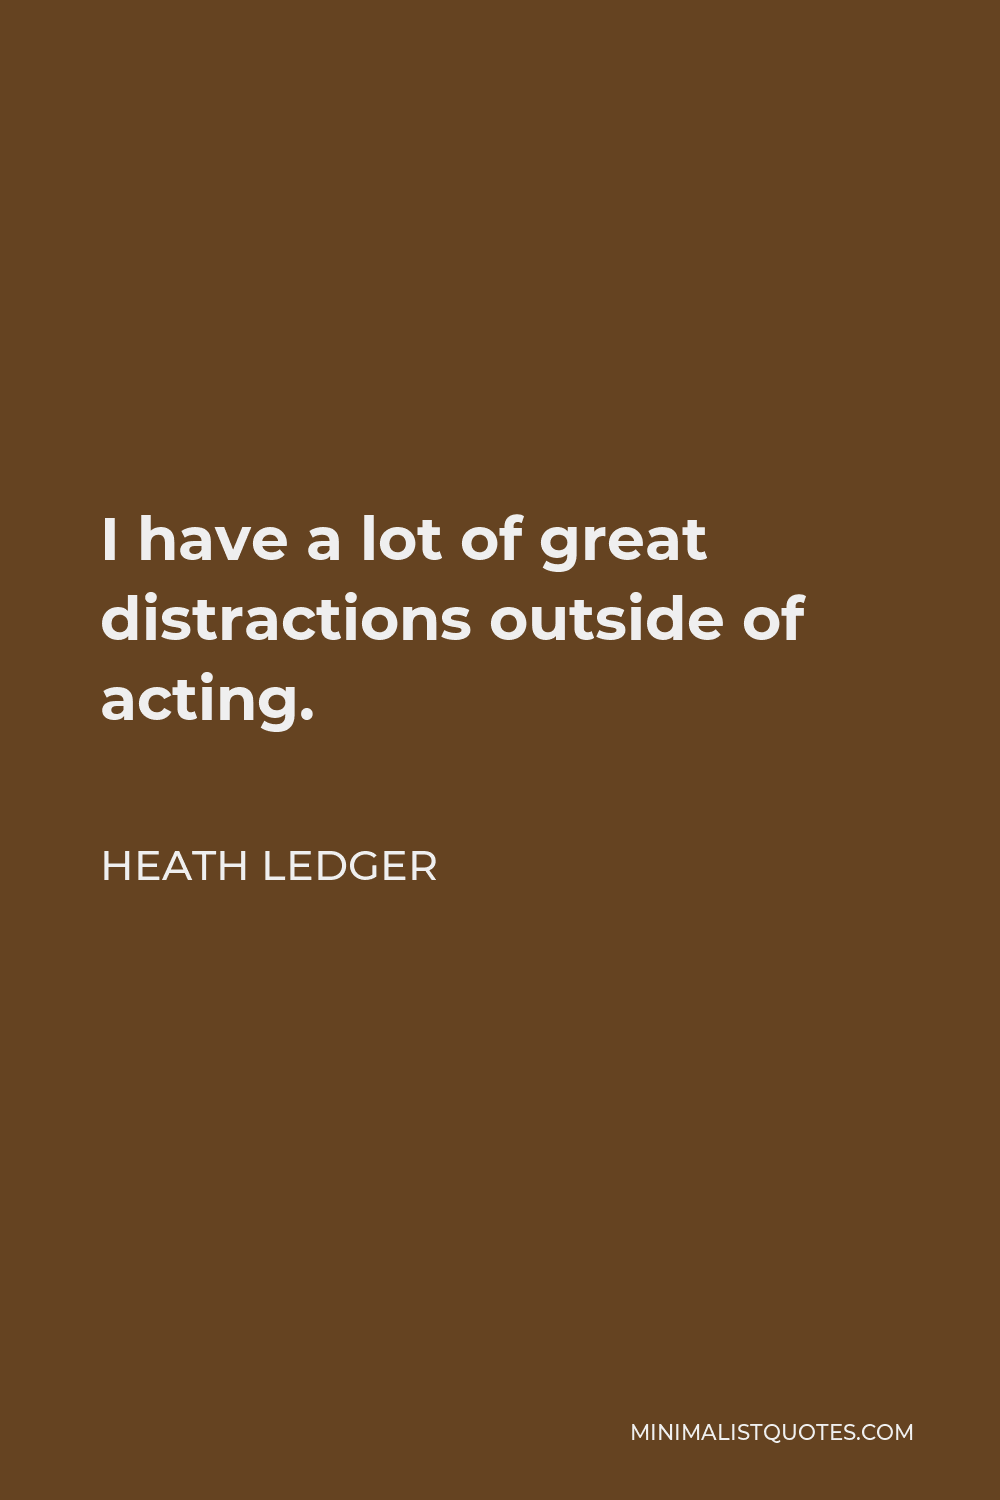 Heath Ledger Quote - I have a lot of great distractions outside of acting.